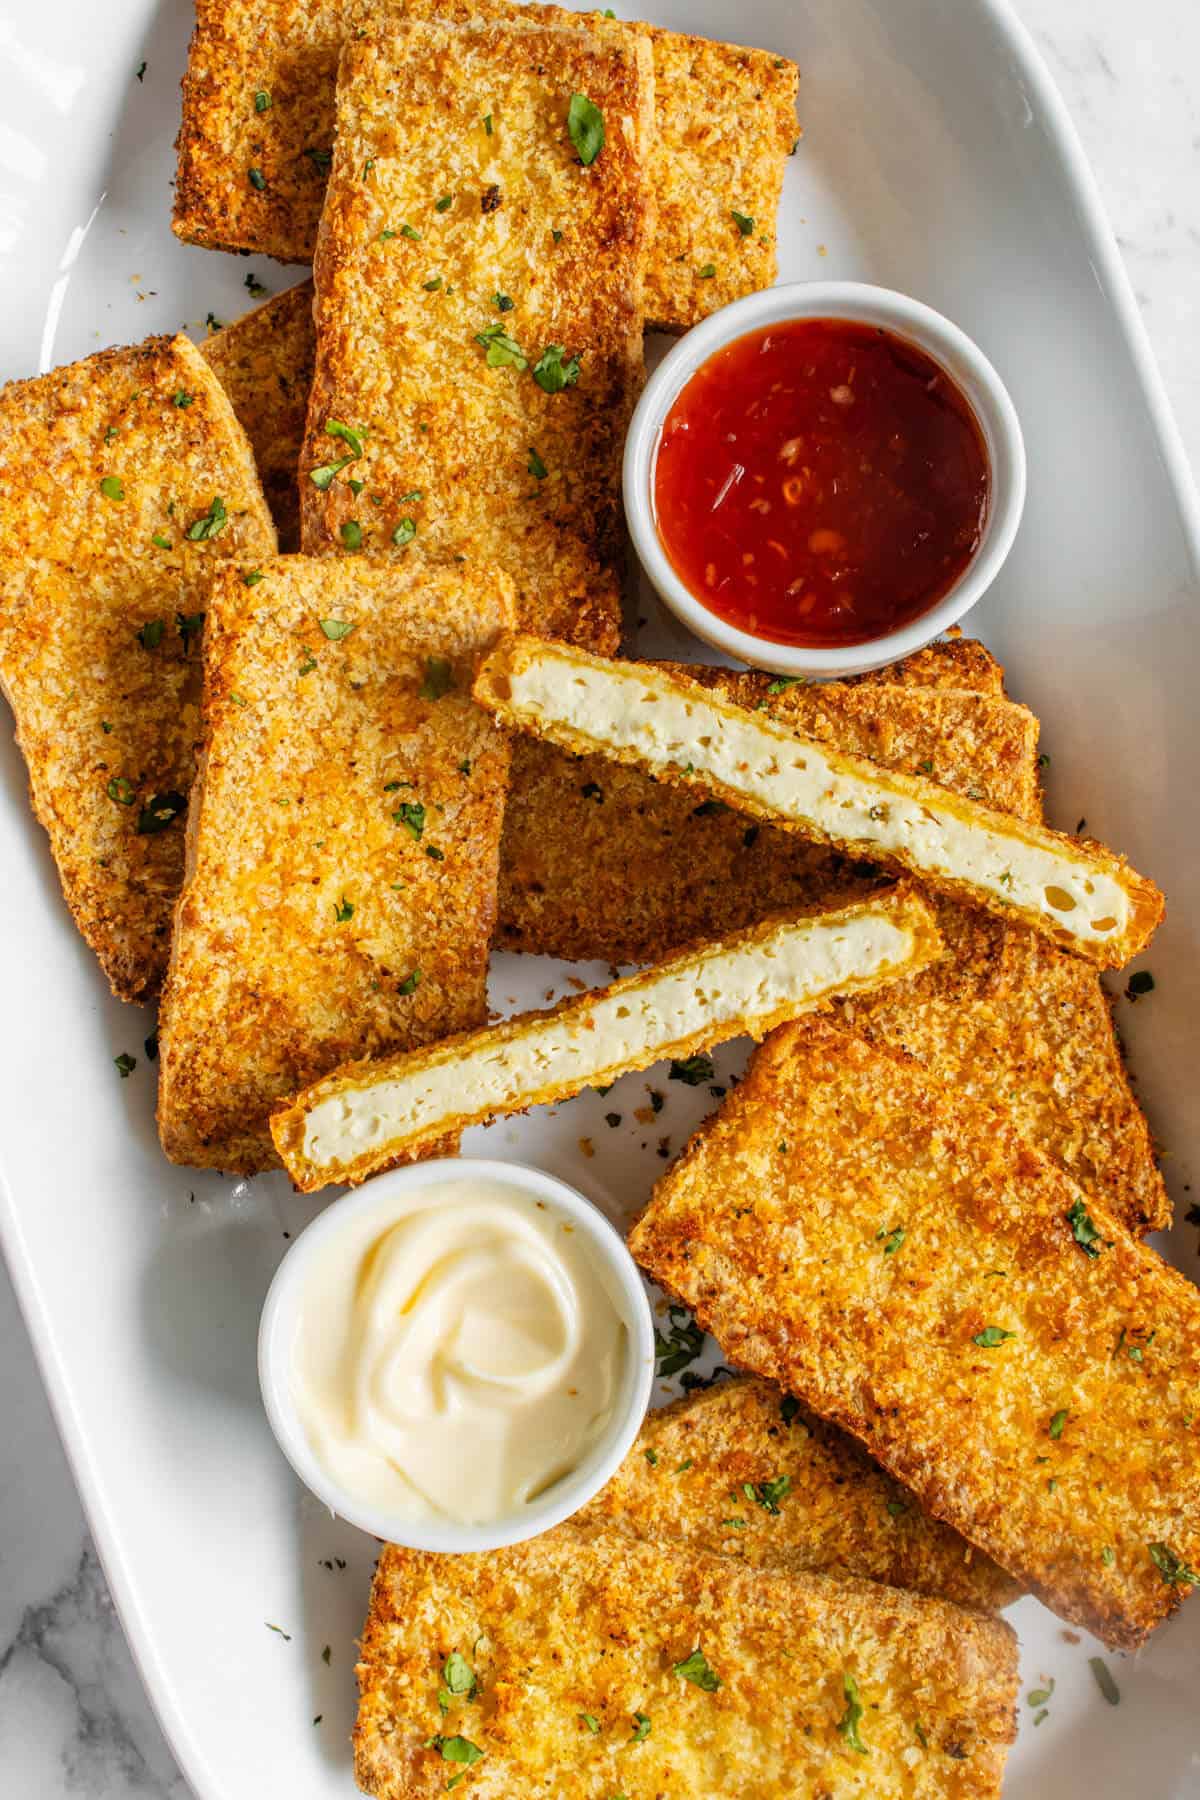 Breaded Tofu with dipping sauces served on a plate